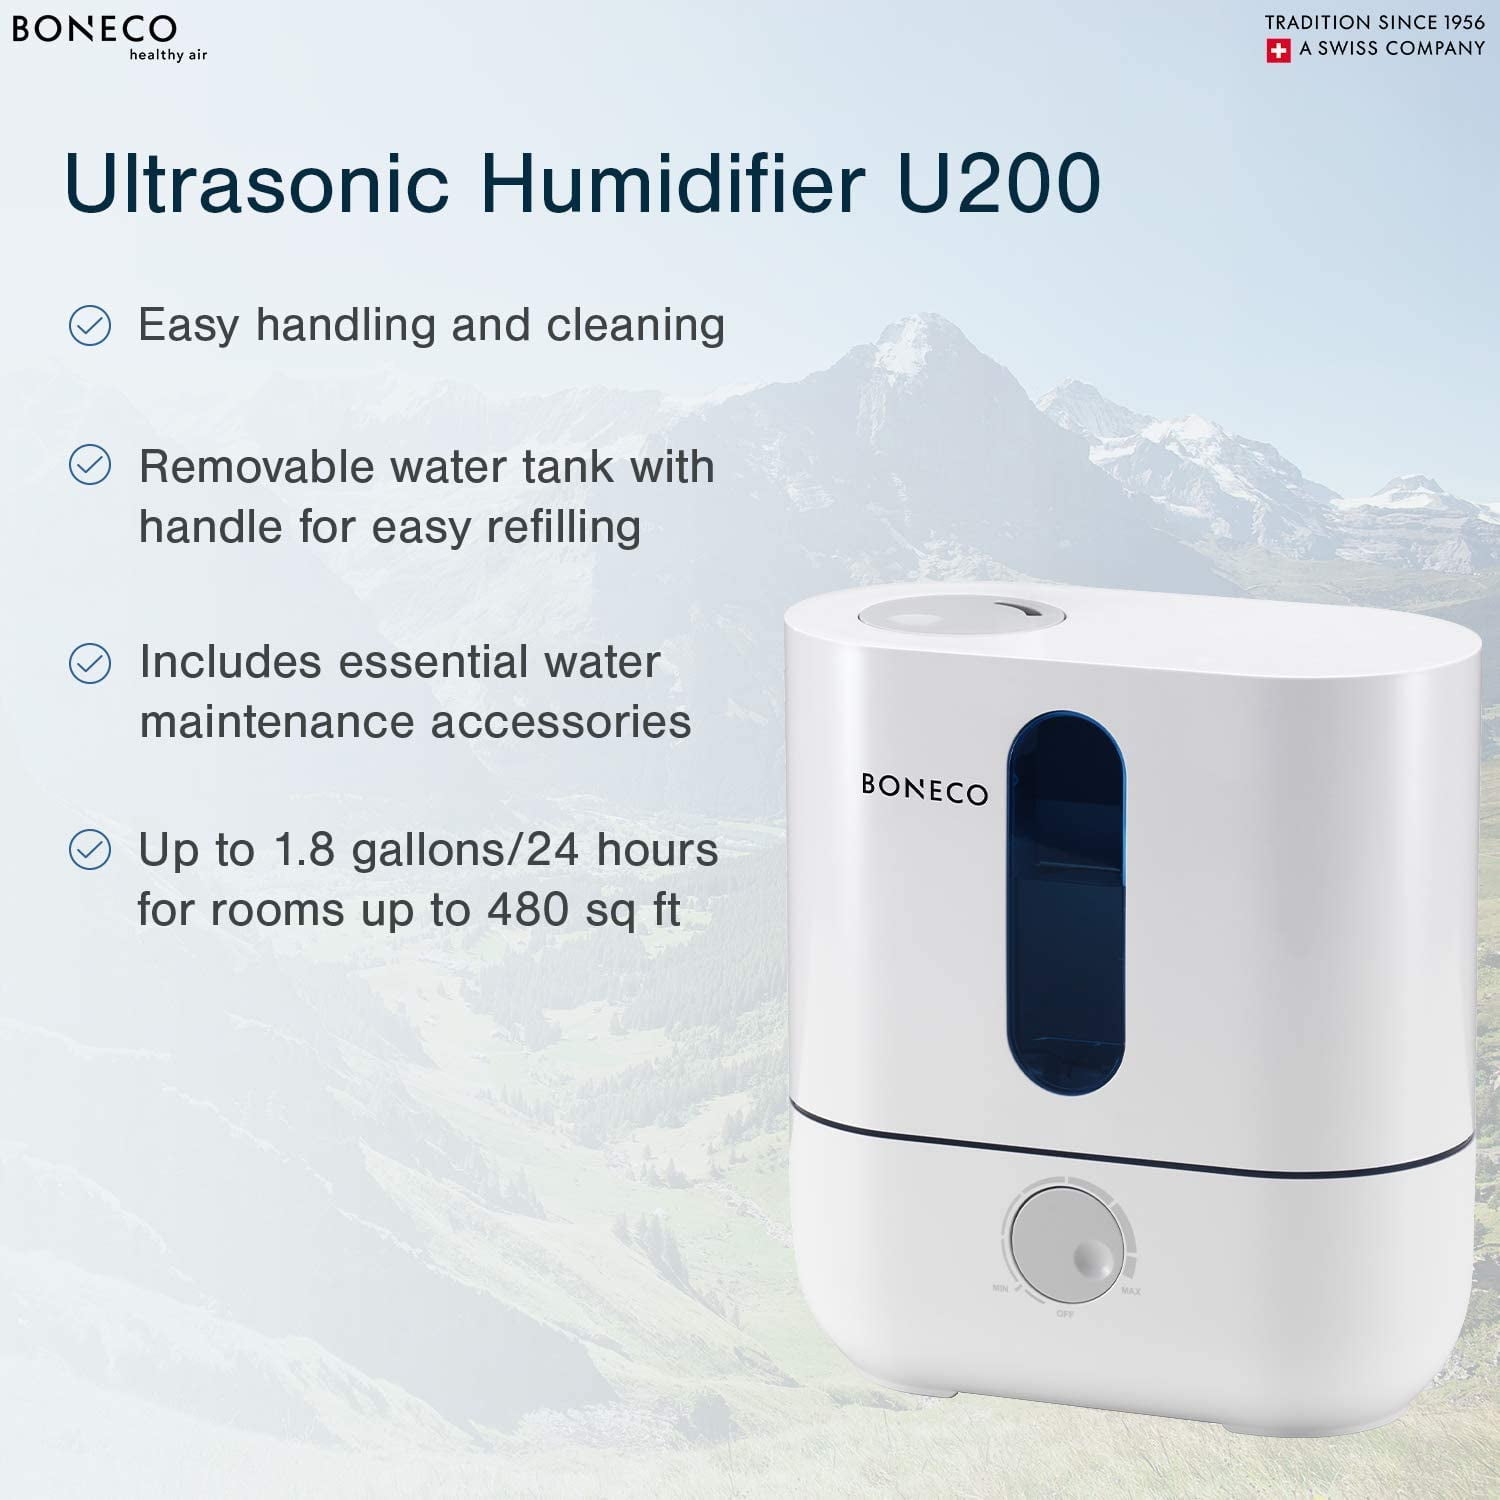 BONECO Cool Mist Ultrasonic Humidifier U200 Air Room Humidifiers Led White NEW 7 for sale online